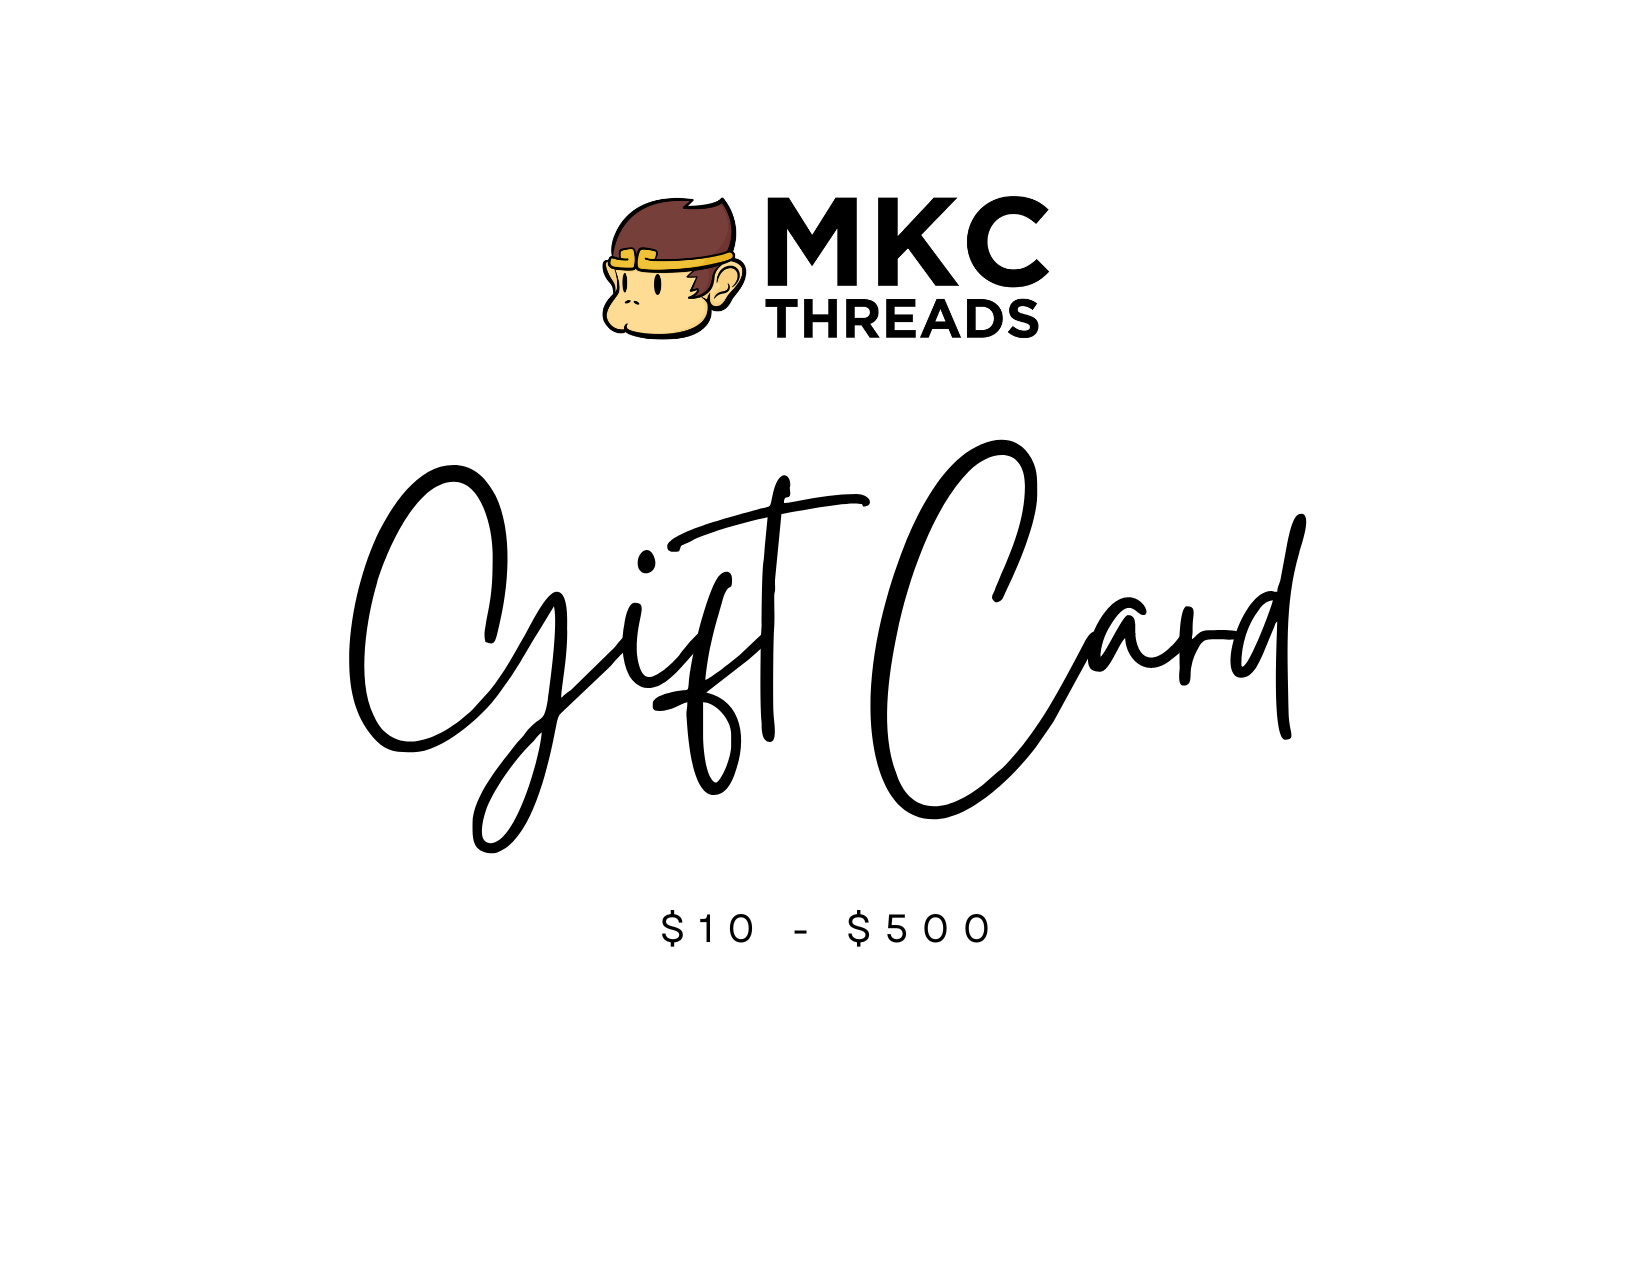 Using a KMC or Gift Card